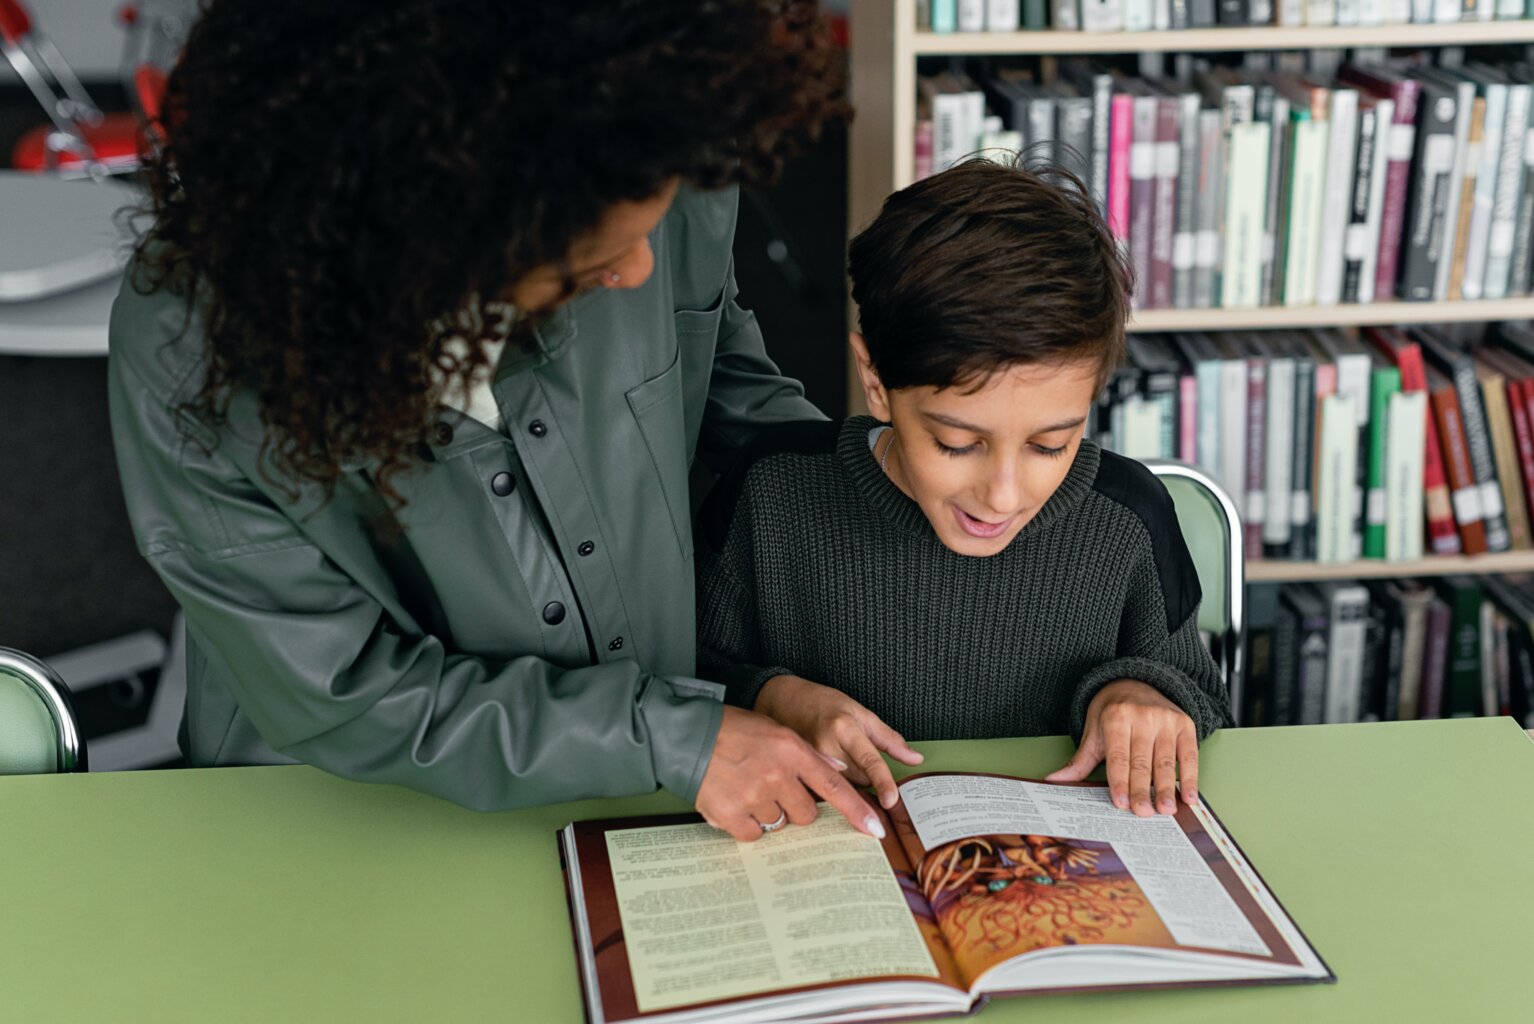 Woman helping a boy read a book in the library.